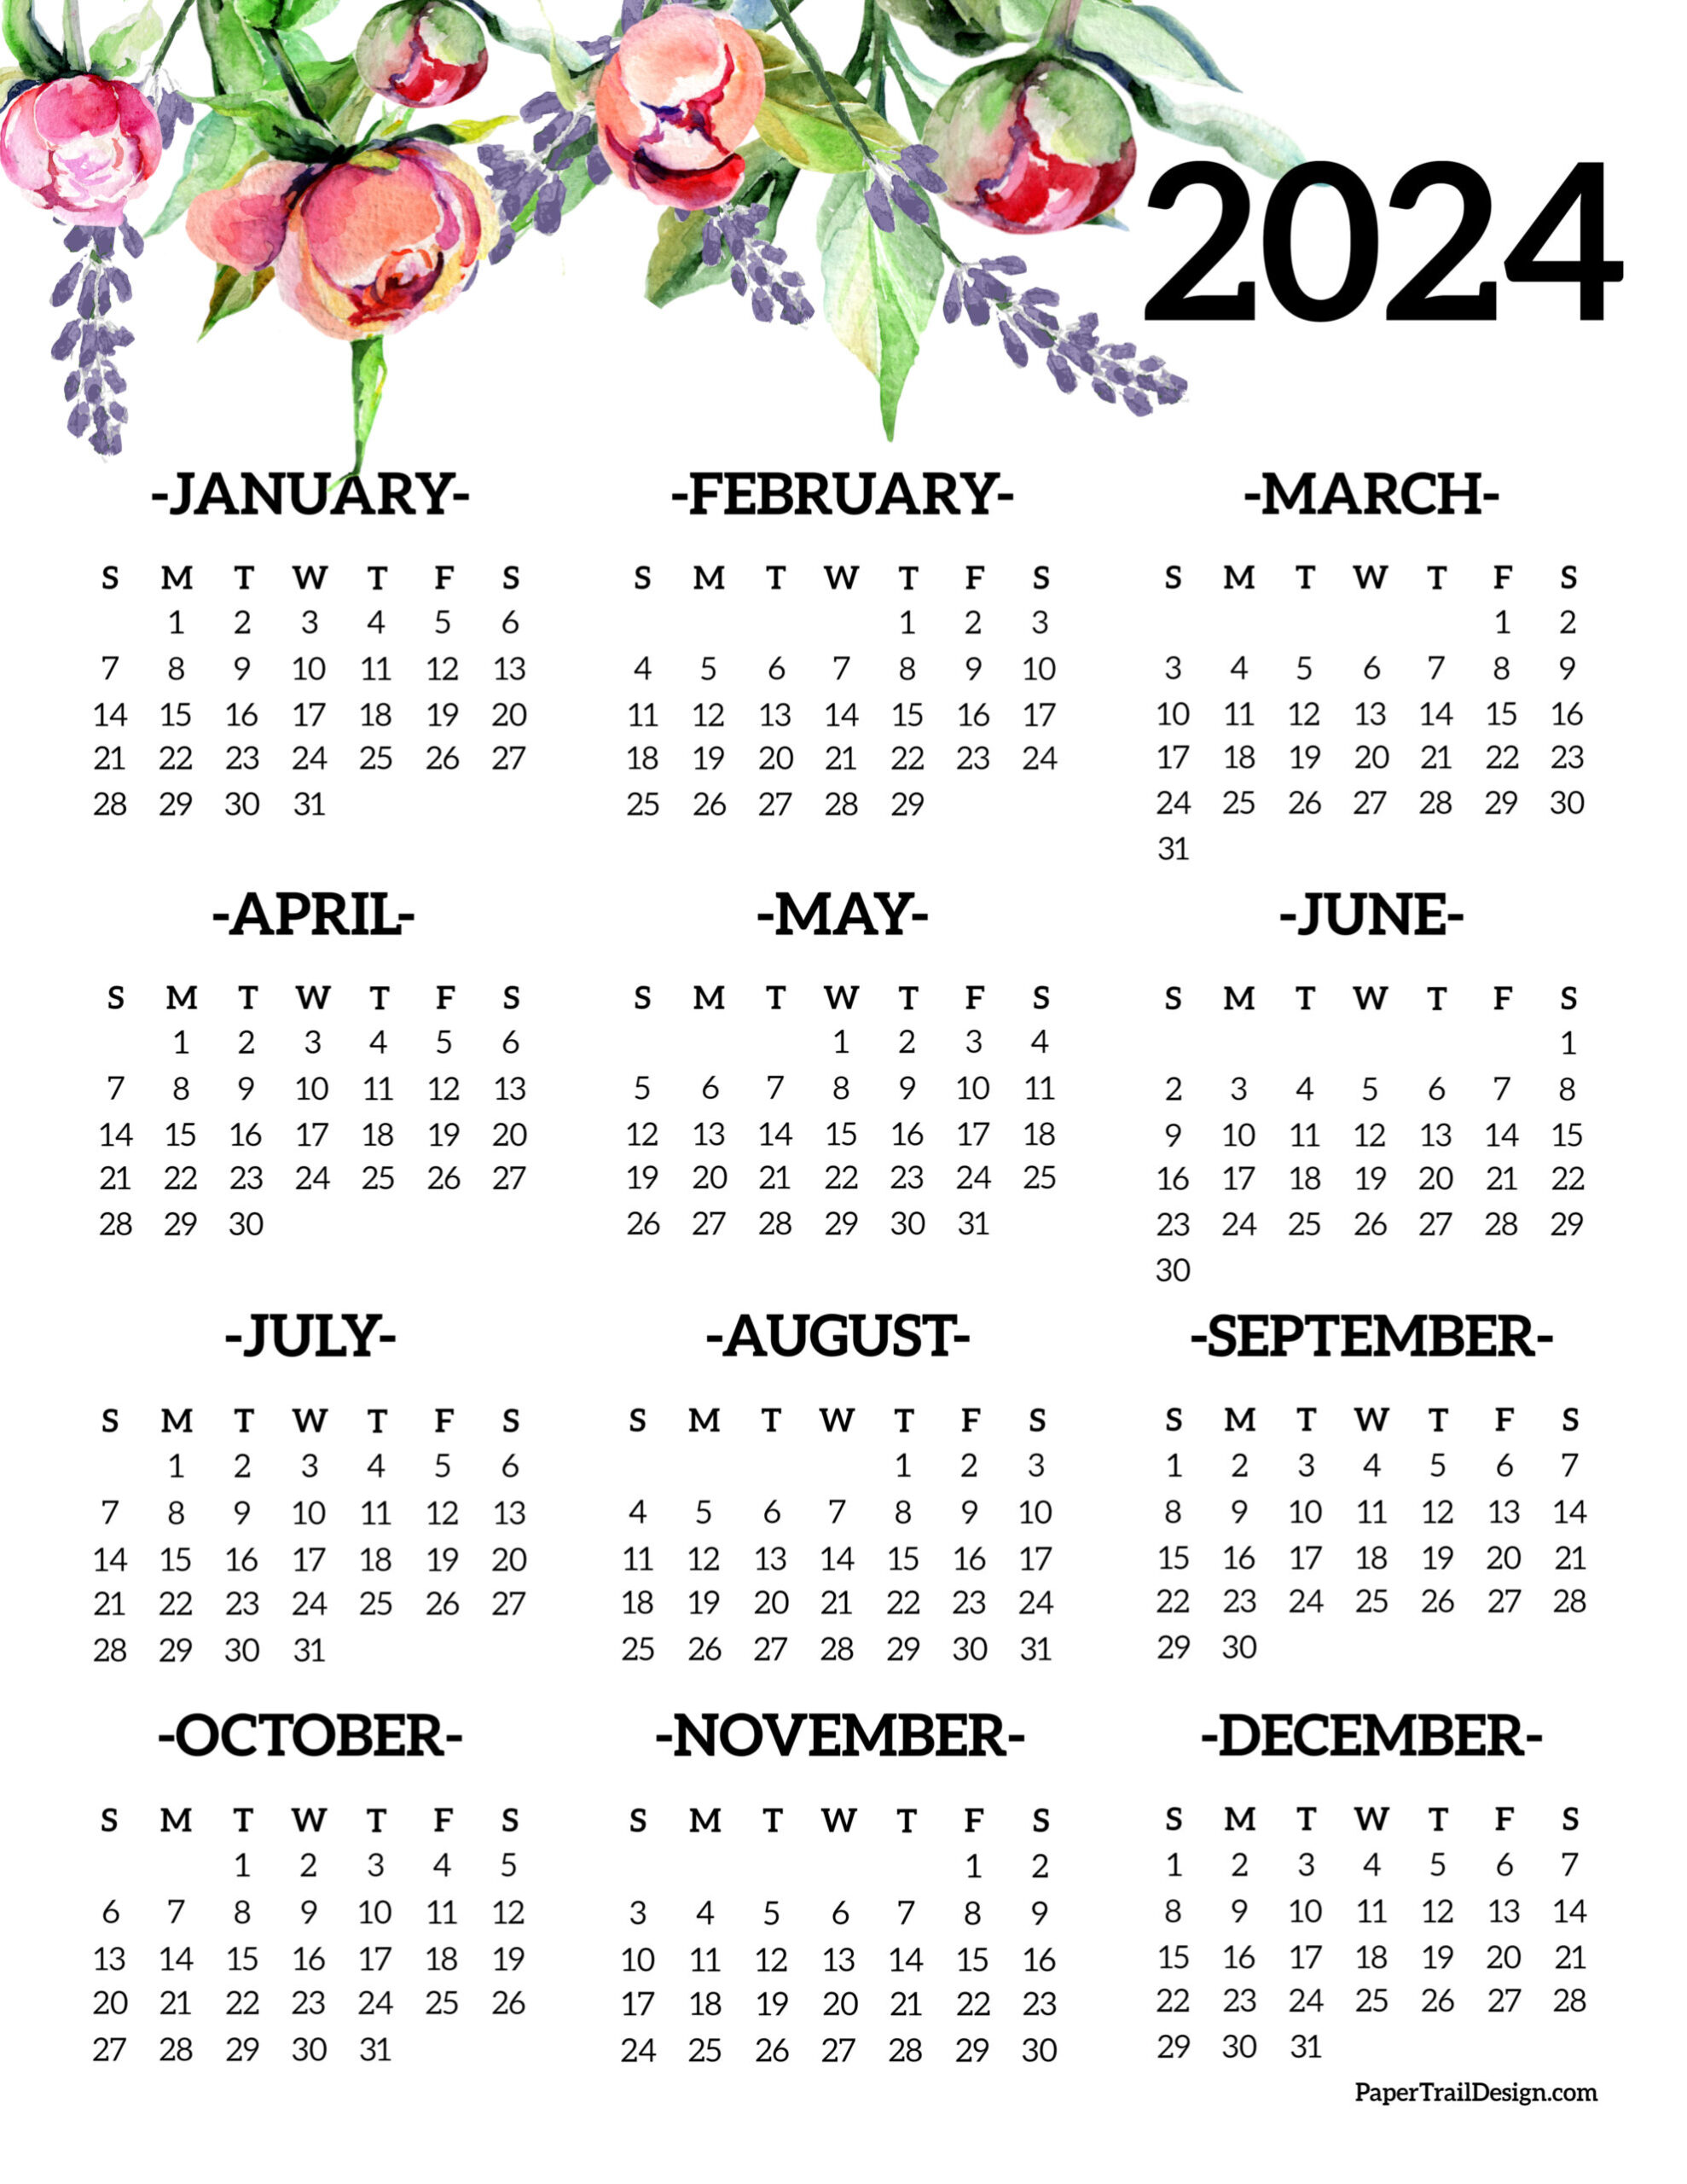 Calendar 2024 Printable One Page - Paper Trail Design for Printable Calendar 2024 One Page